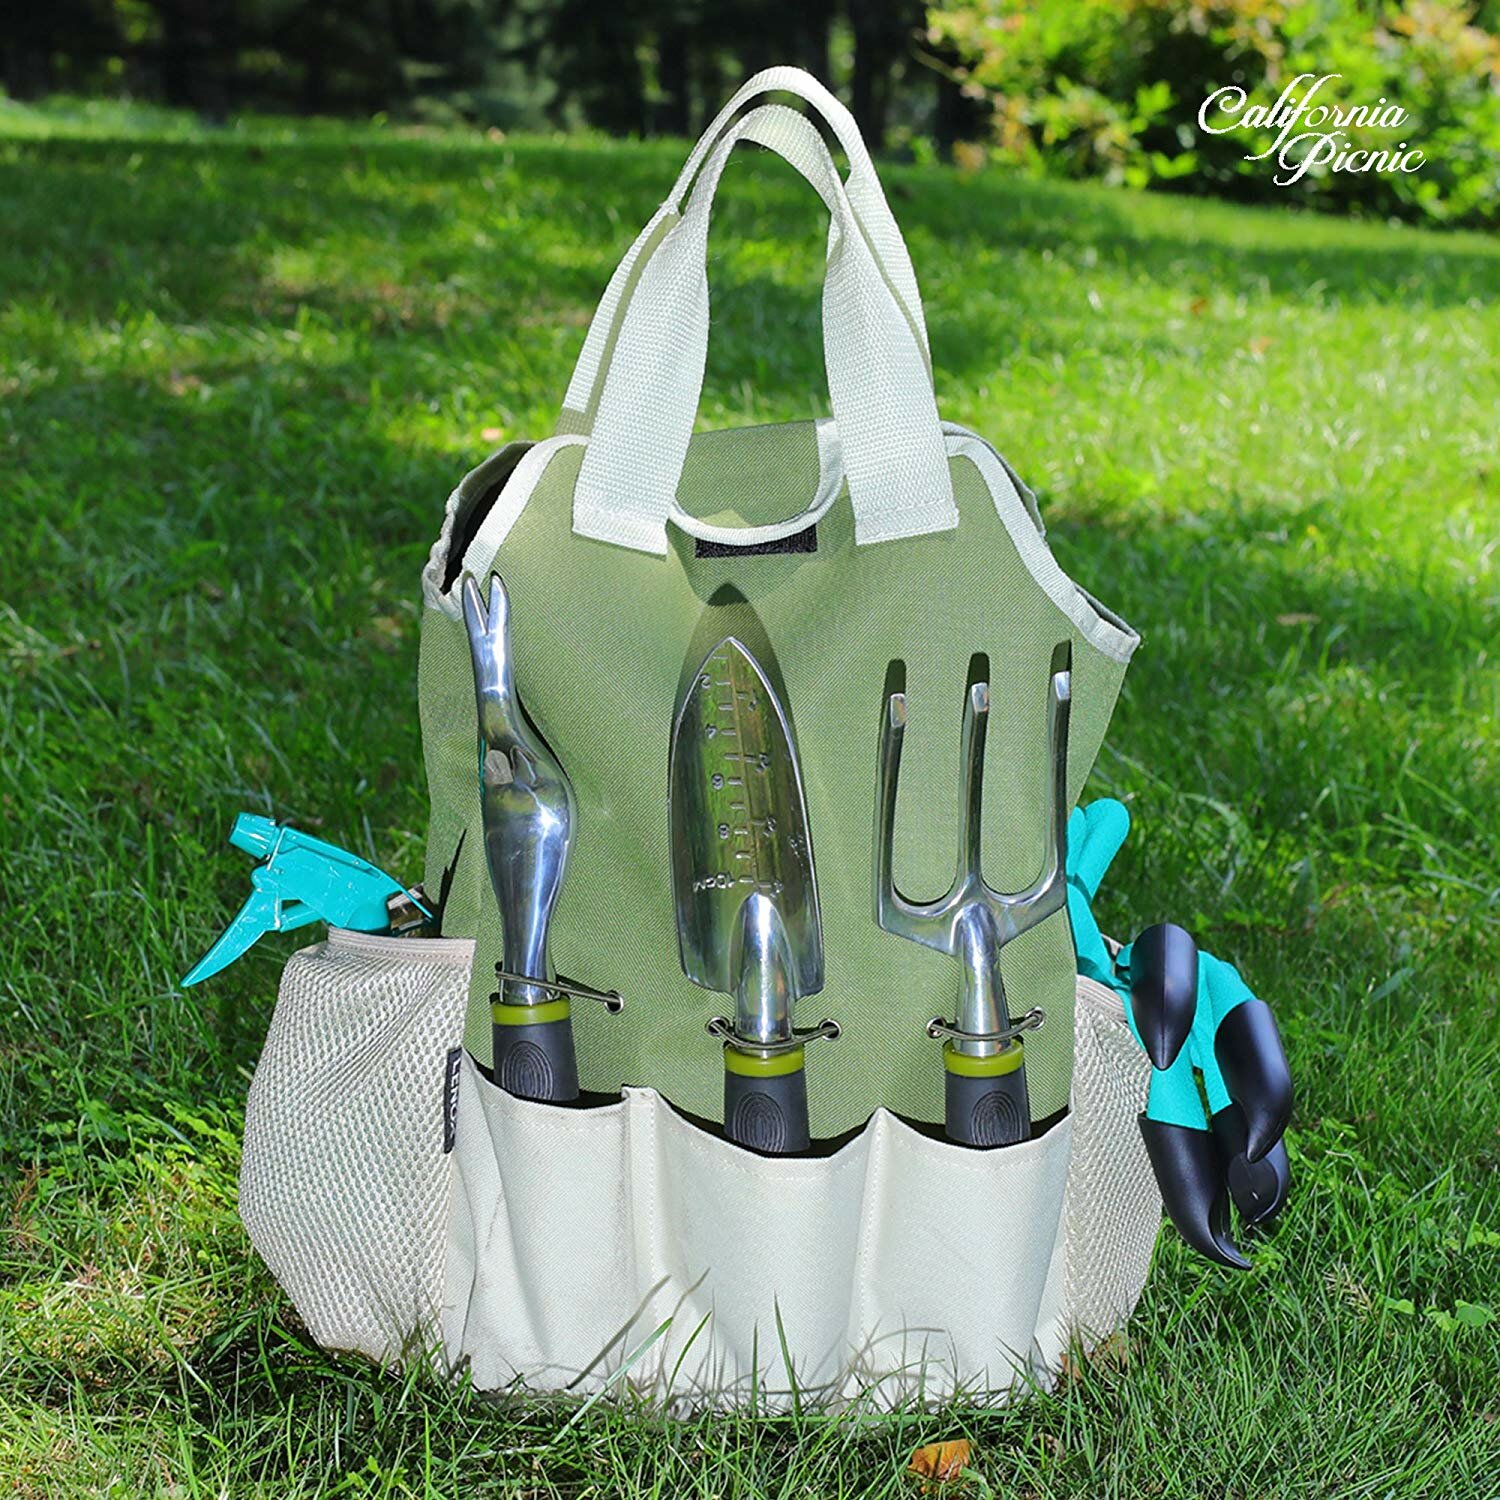 9 Piece Garden Tool Set Includes Garden Tote Bag and 6 Hand Tools